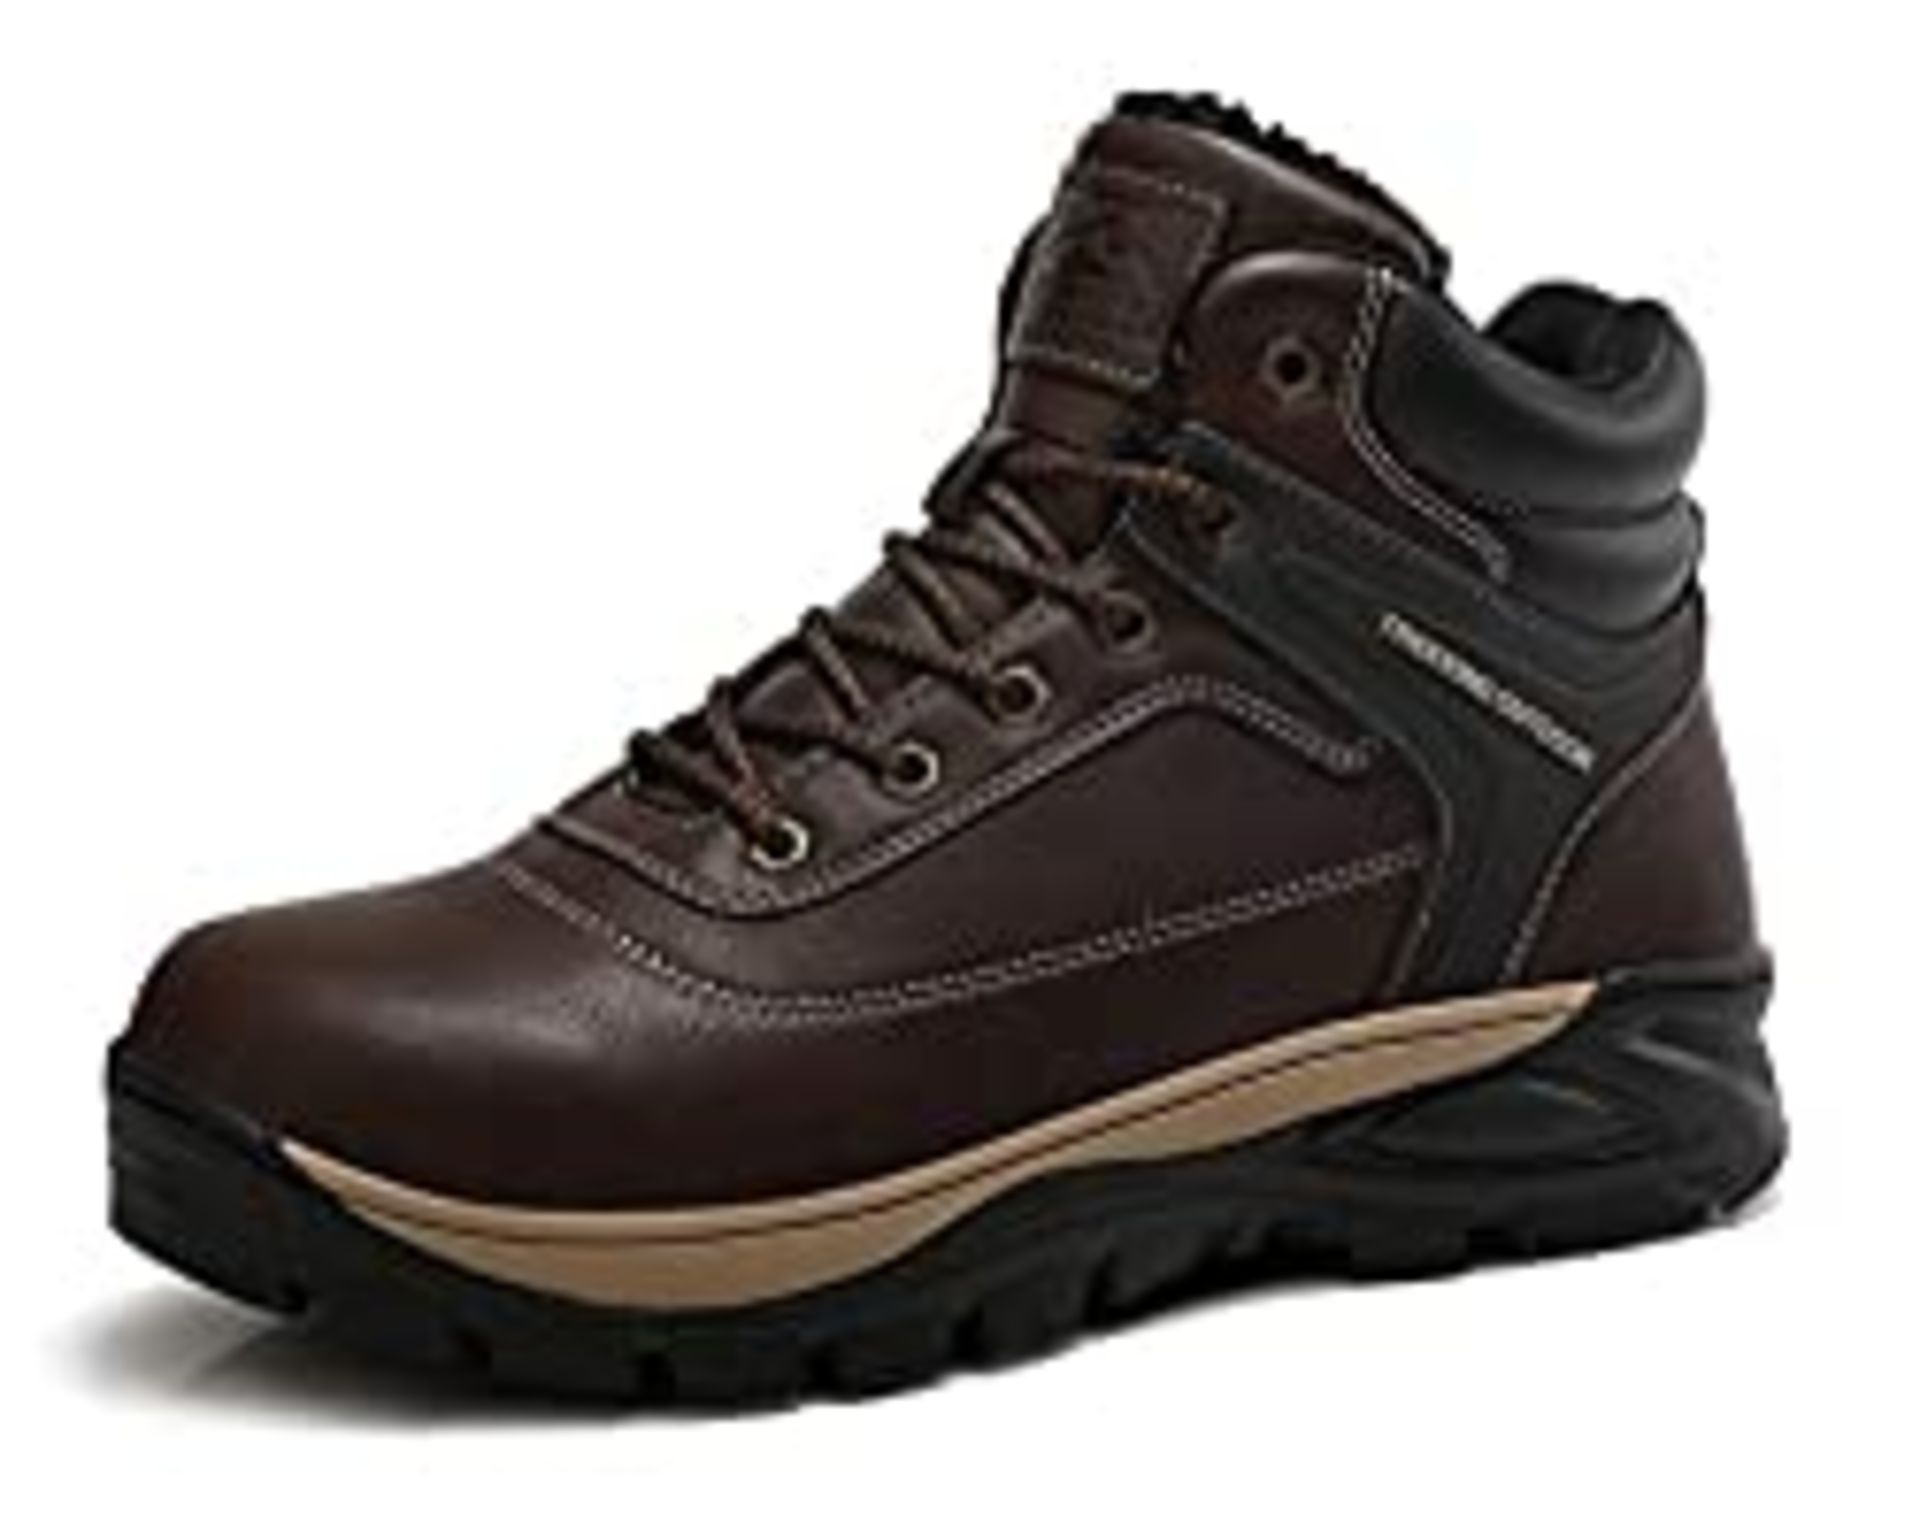 RRP £29.99 AX BOXING Men Winter Boots Add Cotton Warmth Walking